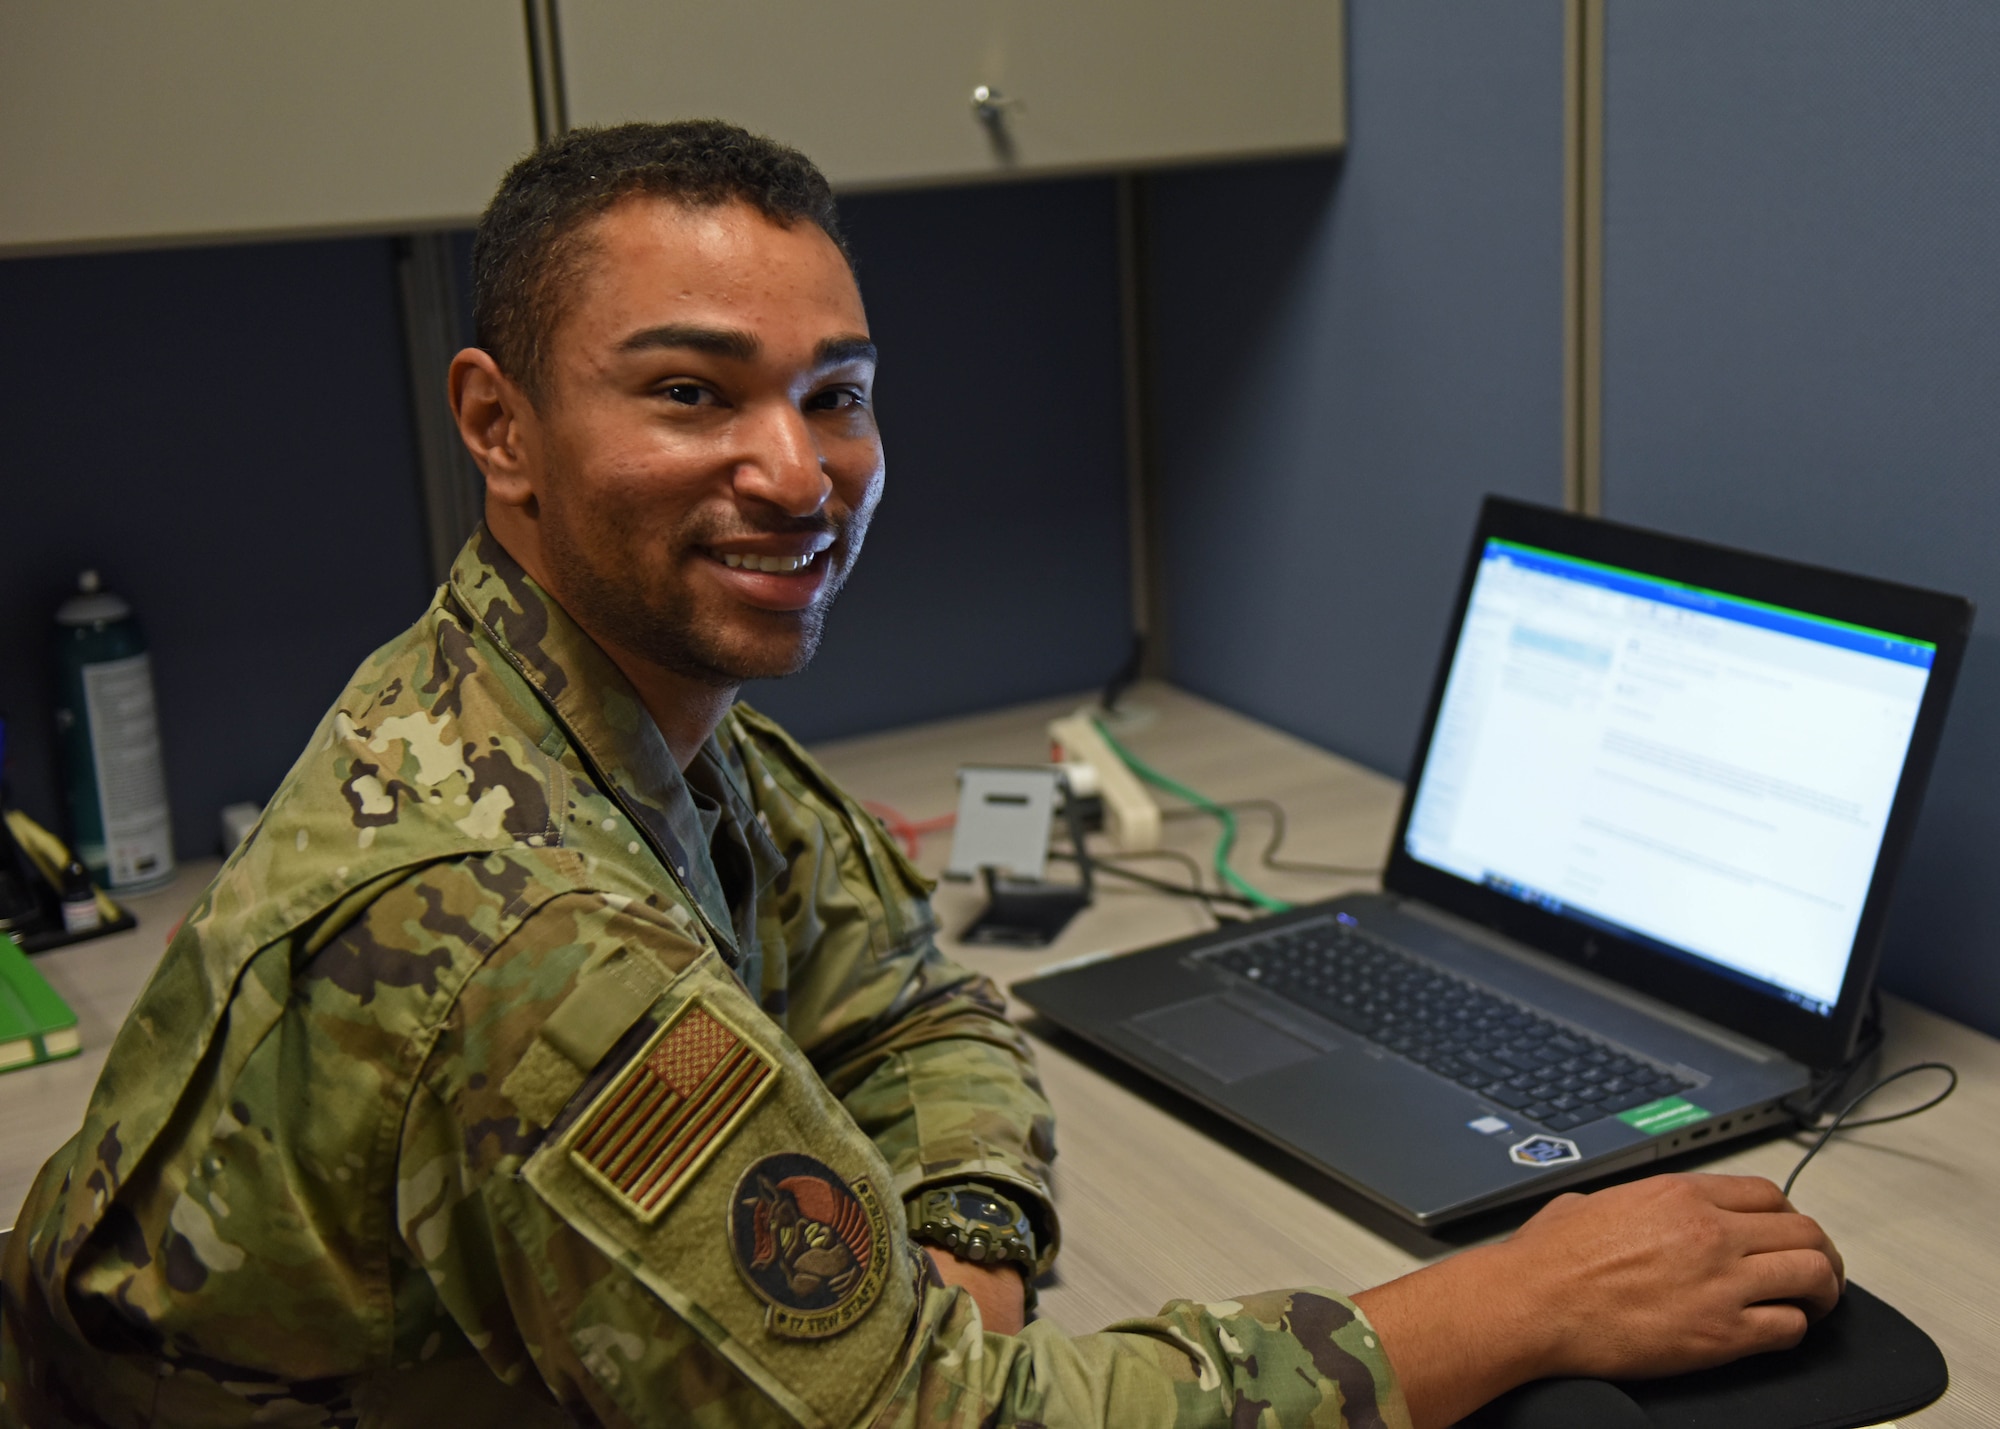 U.S. Air Force Tech. Sgt. Skott Cameron, 17th Comptroller Squadron noncommissioned officer in charge of financial operations, poses for a photo at his desk at Goodfellow Air Force Base, Texas, Aug. 16, 2022. Cameron oversees the processing of payments, travel vouchers, and permanent change of station forms across the 17th Training Wing. (U.S. Air Force photo by Airman 1st Class Sarah Williams)